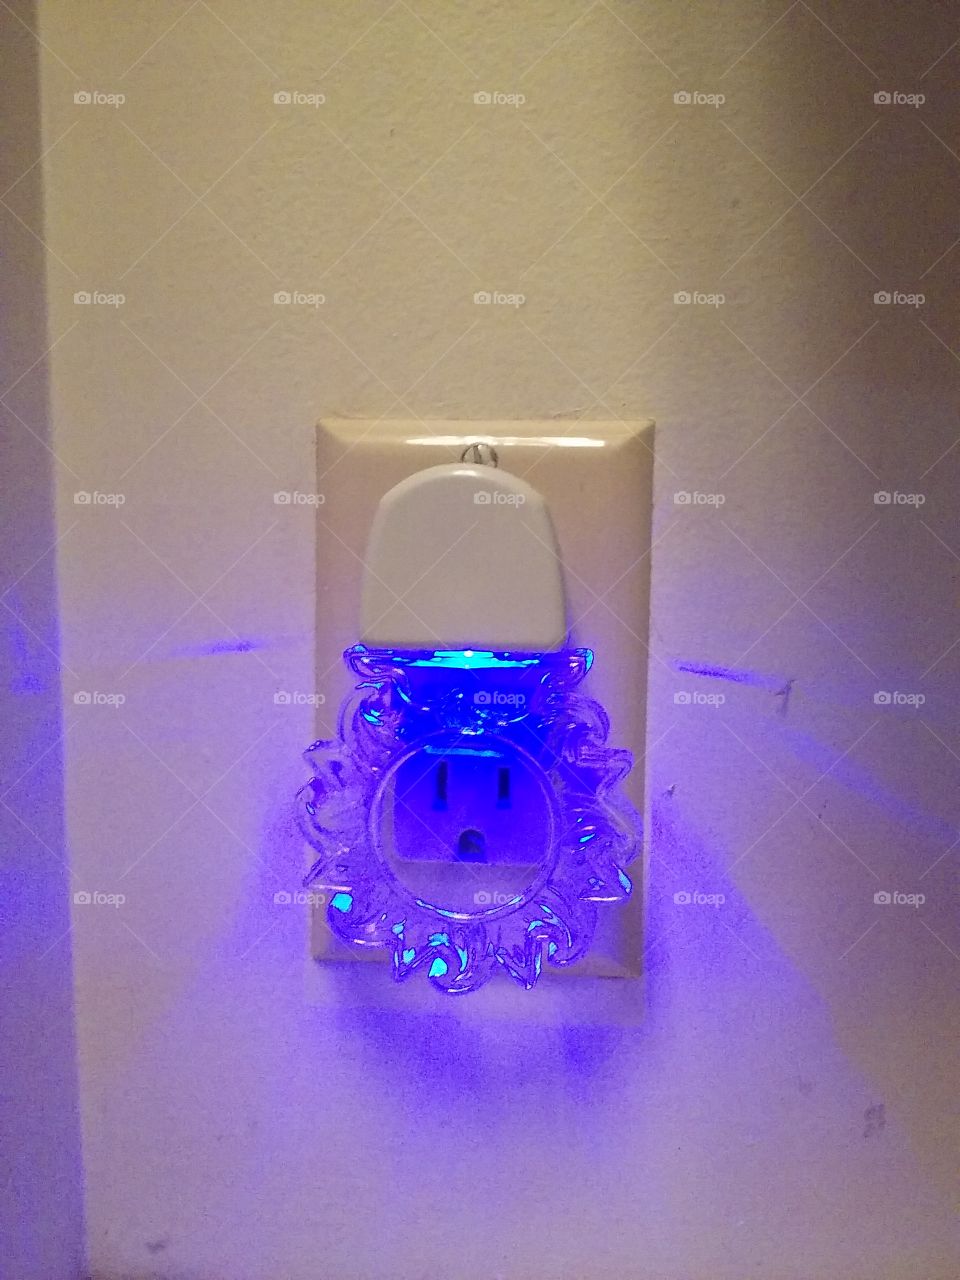 LED night light plugged in upside down!